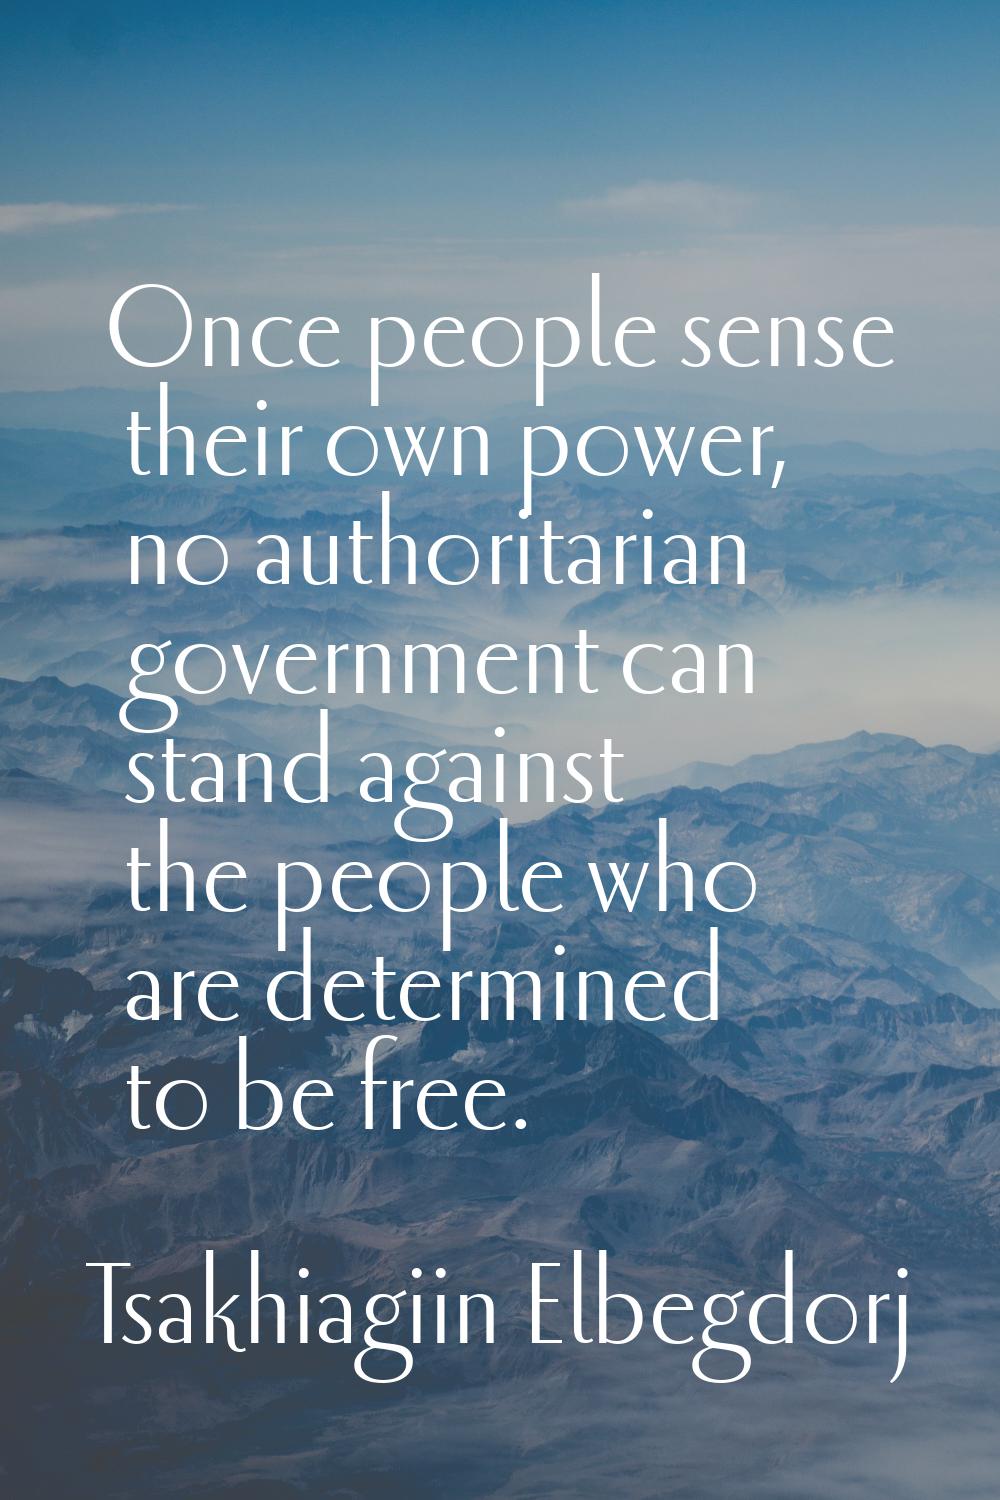 Once people sense their own power, no authoritarian government can stand against the people who are